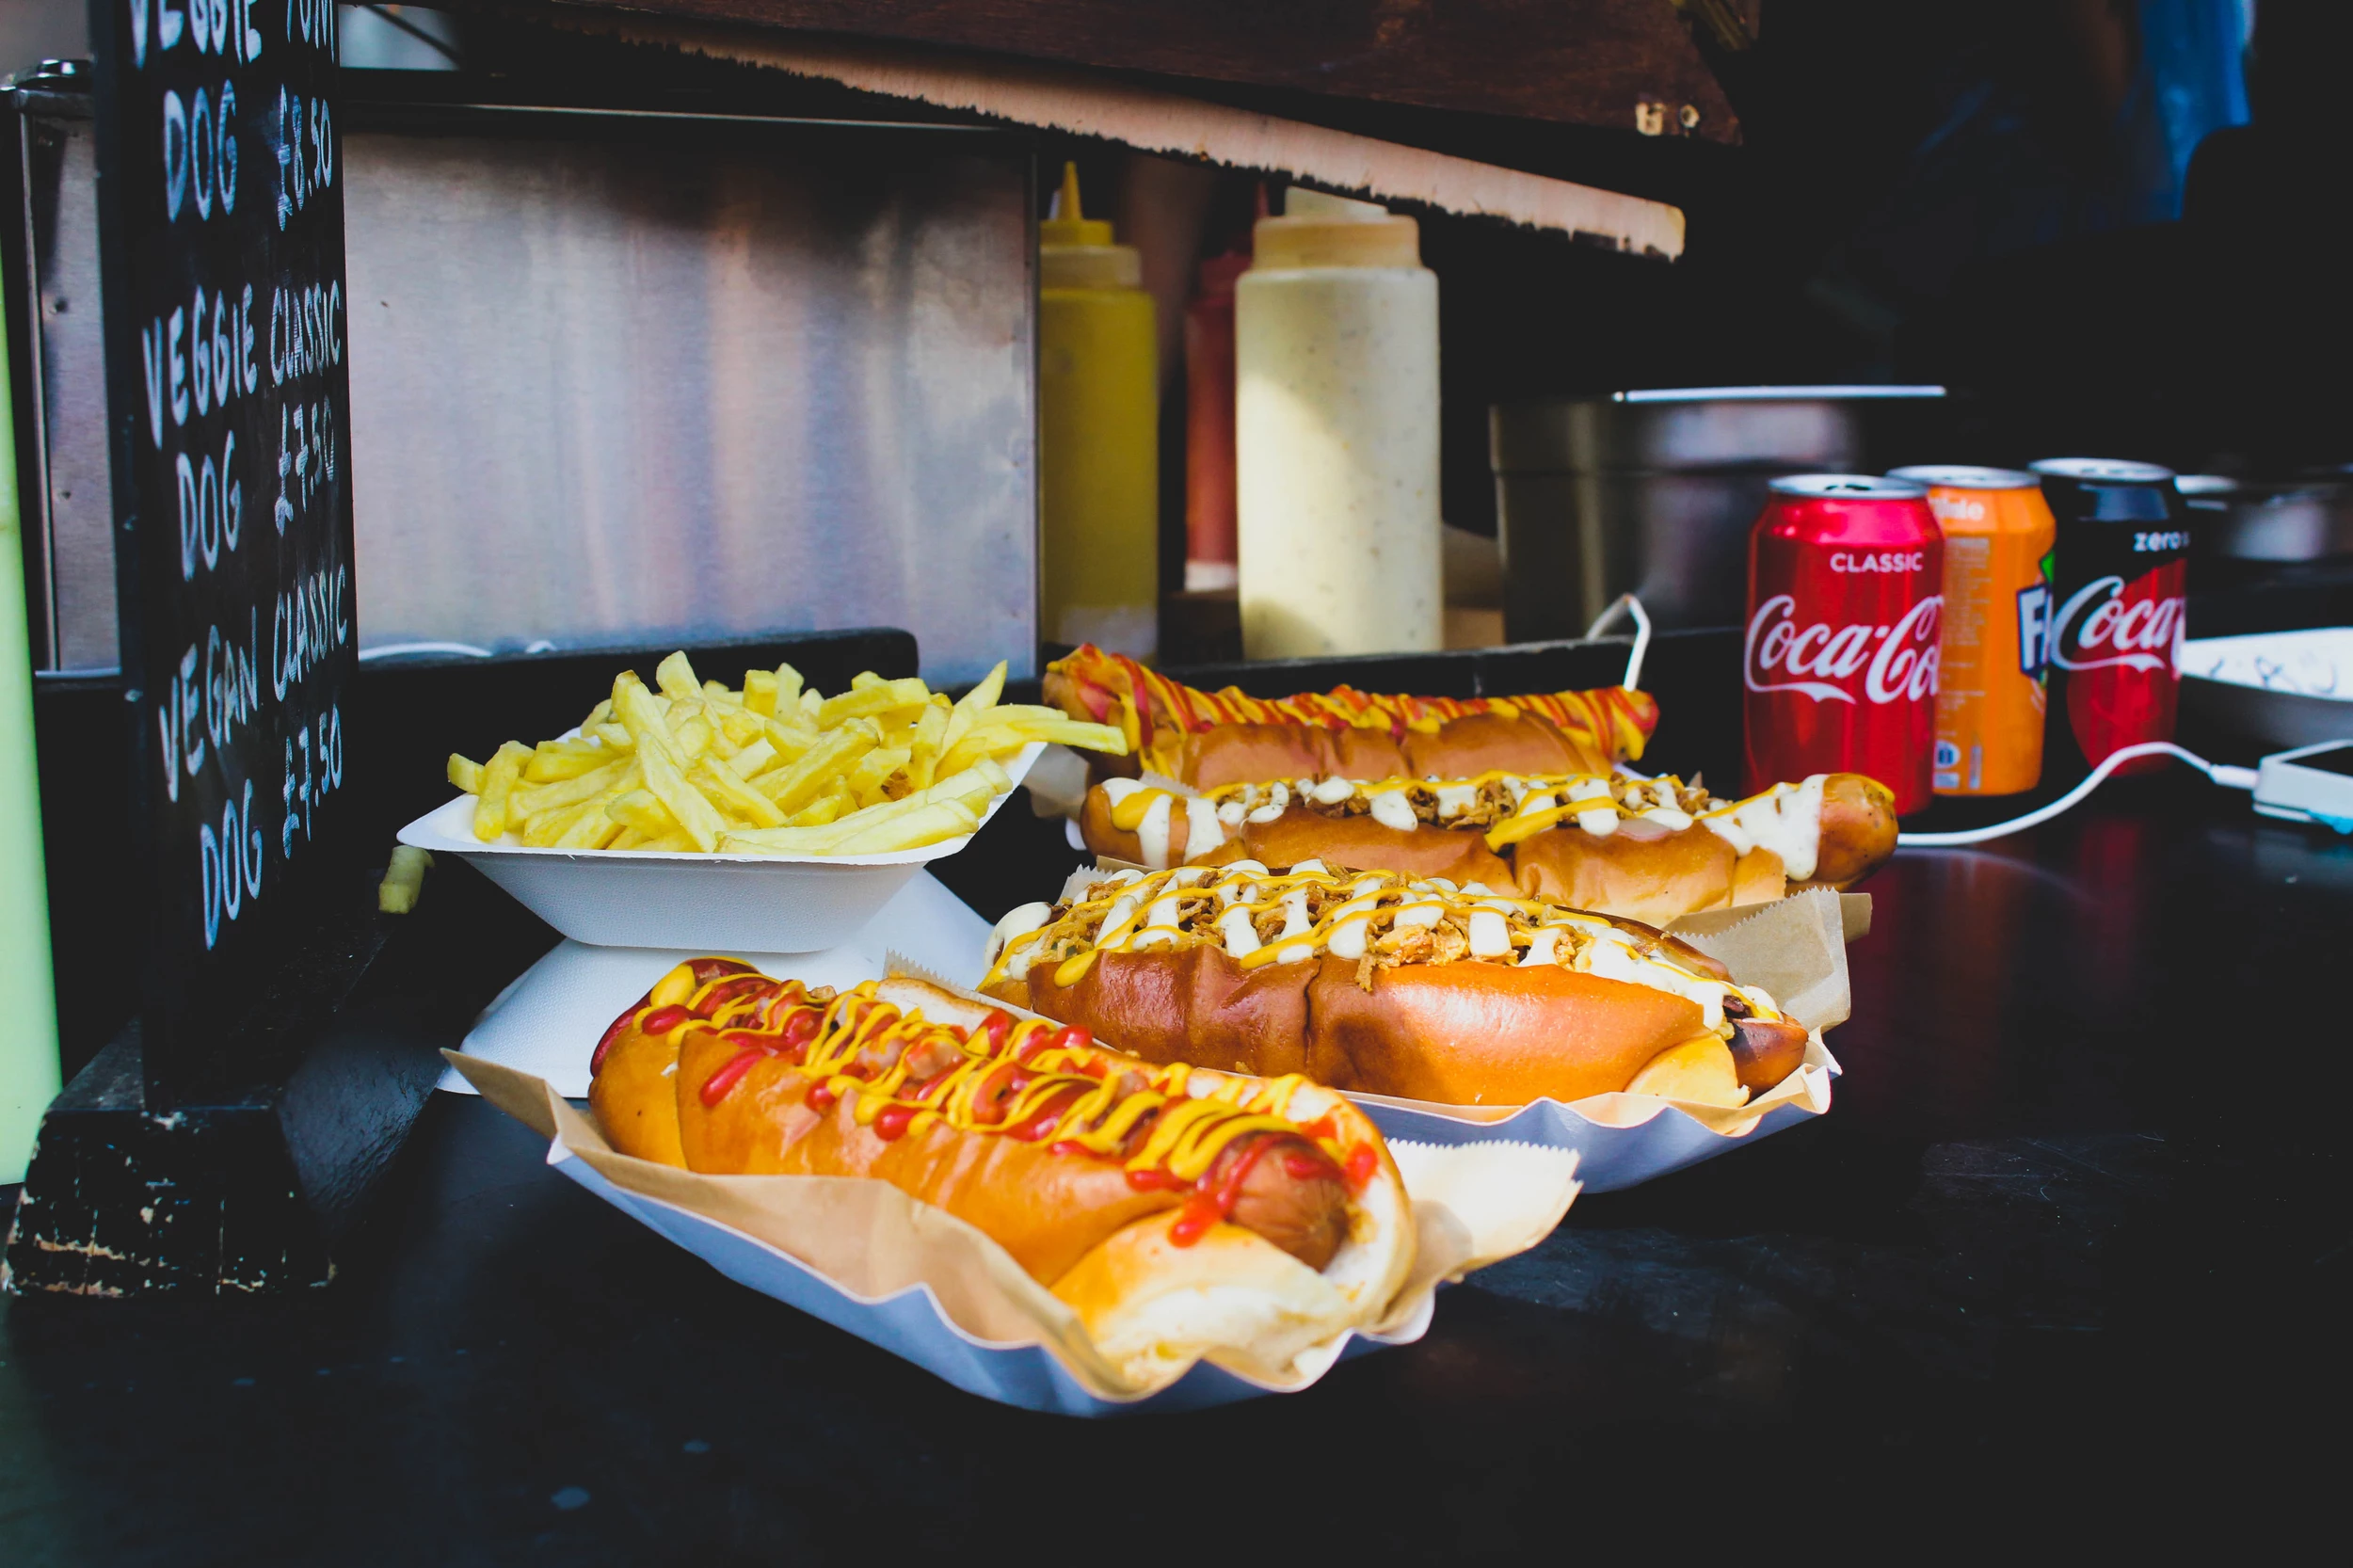 THE BEST 10 Hot Dogs near PARADISE VALLEY, AZ 85253 - Last Updated